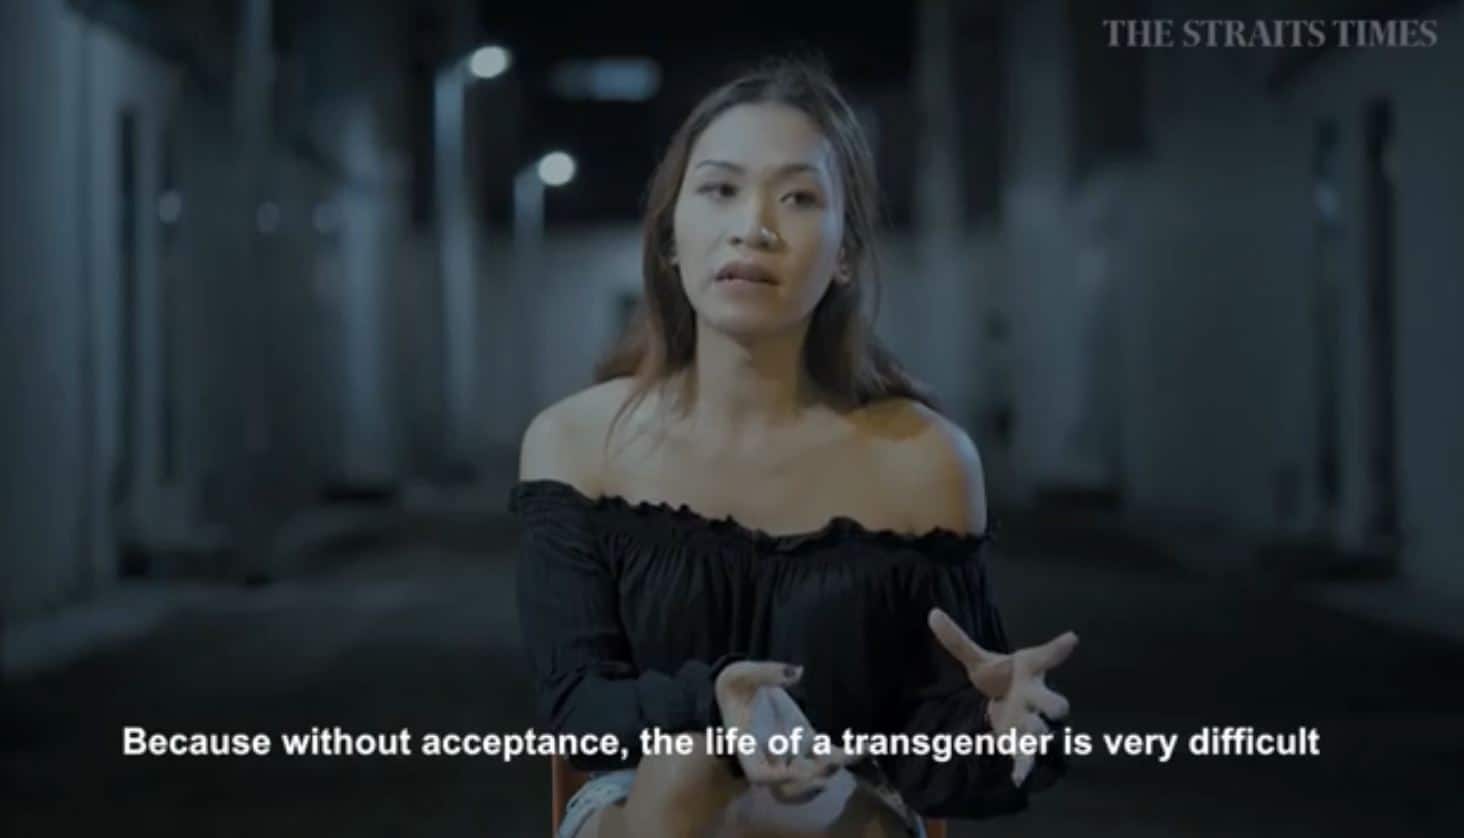 Sherry in a video by The Straits Times. Source.